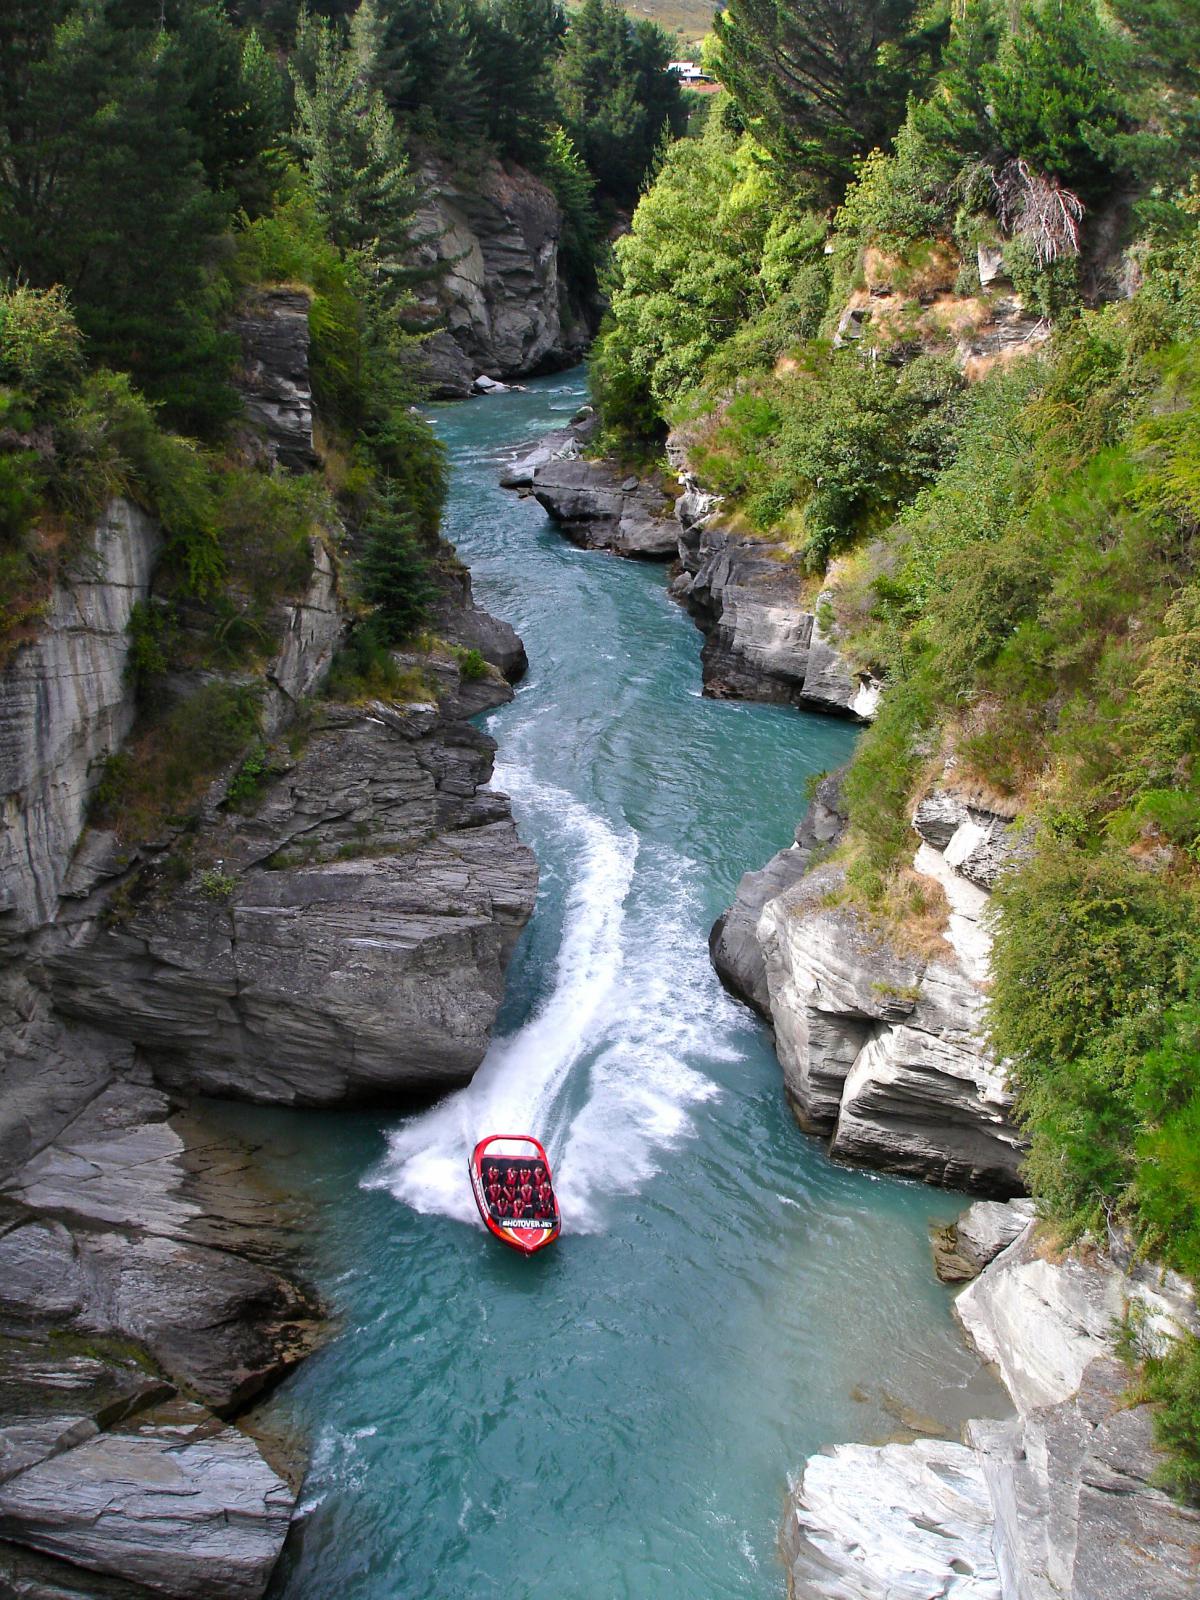 Shotover_Jet,_Jet_Boating_the_Shotover_River_Canyons,_Queenstown,_New_Zealand[1].jpg